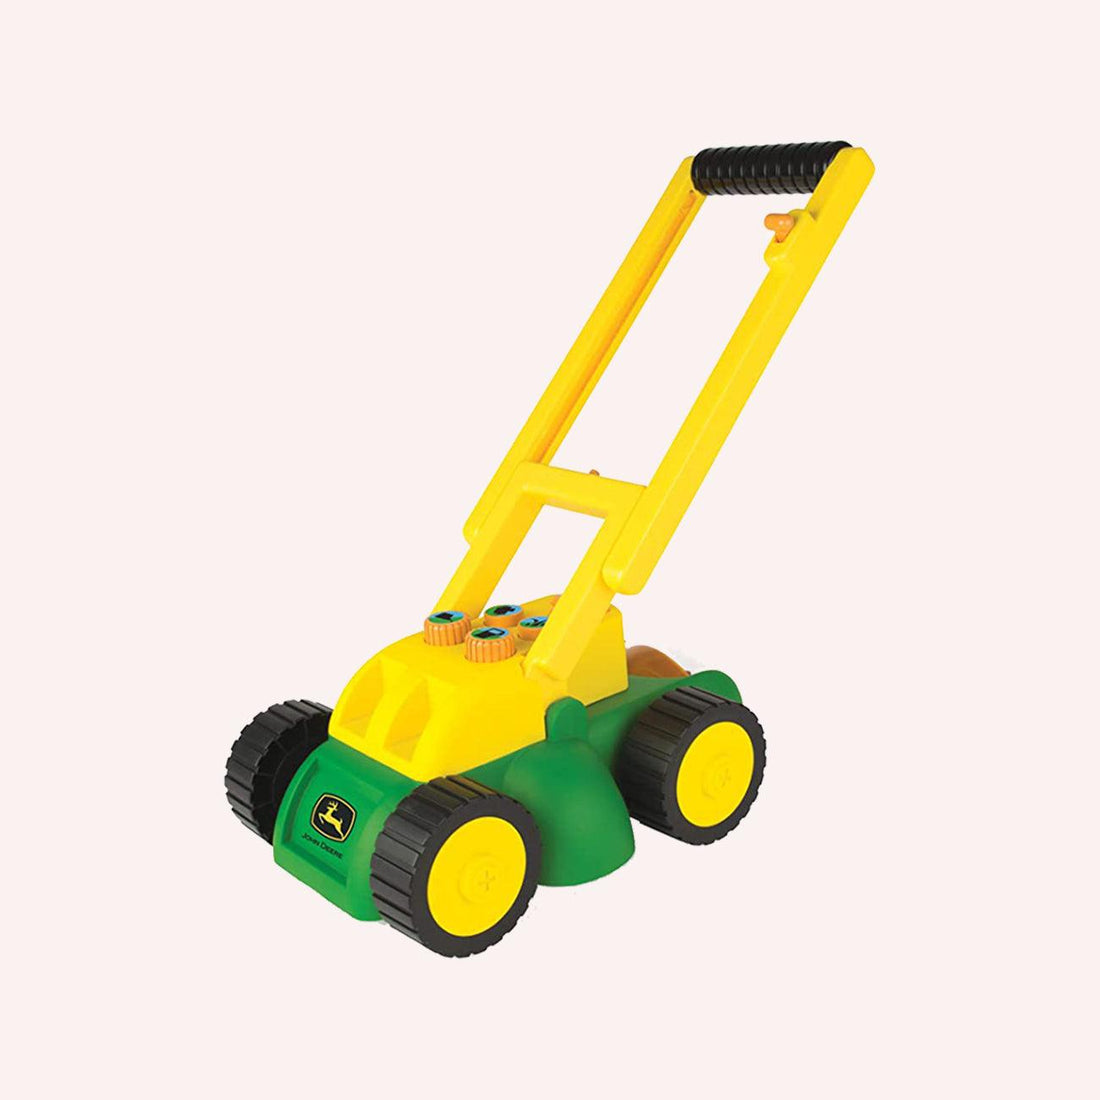 Action Lawn Mower